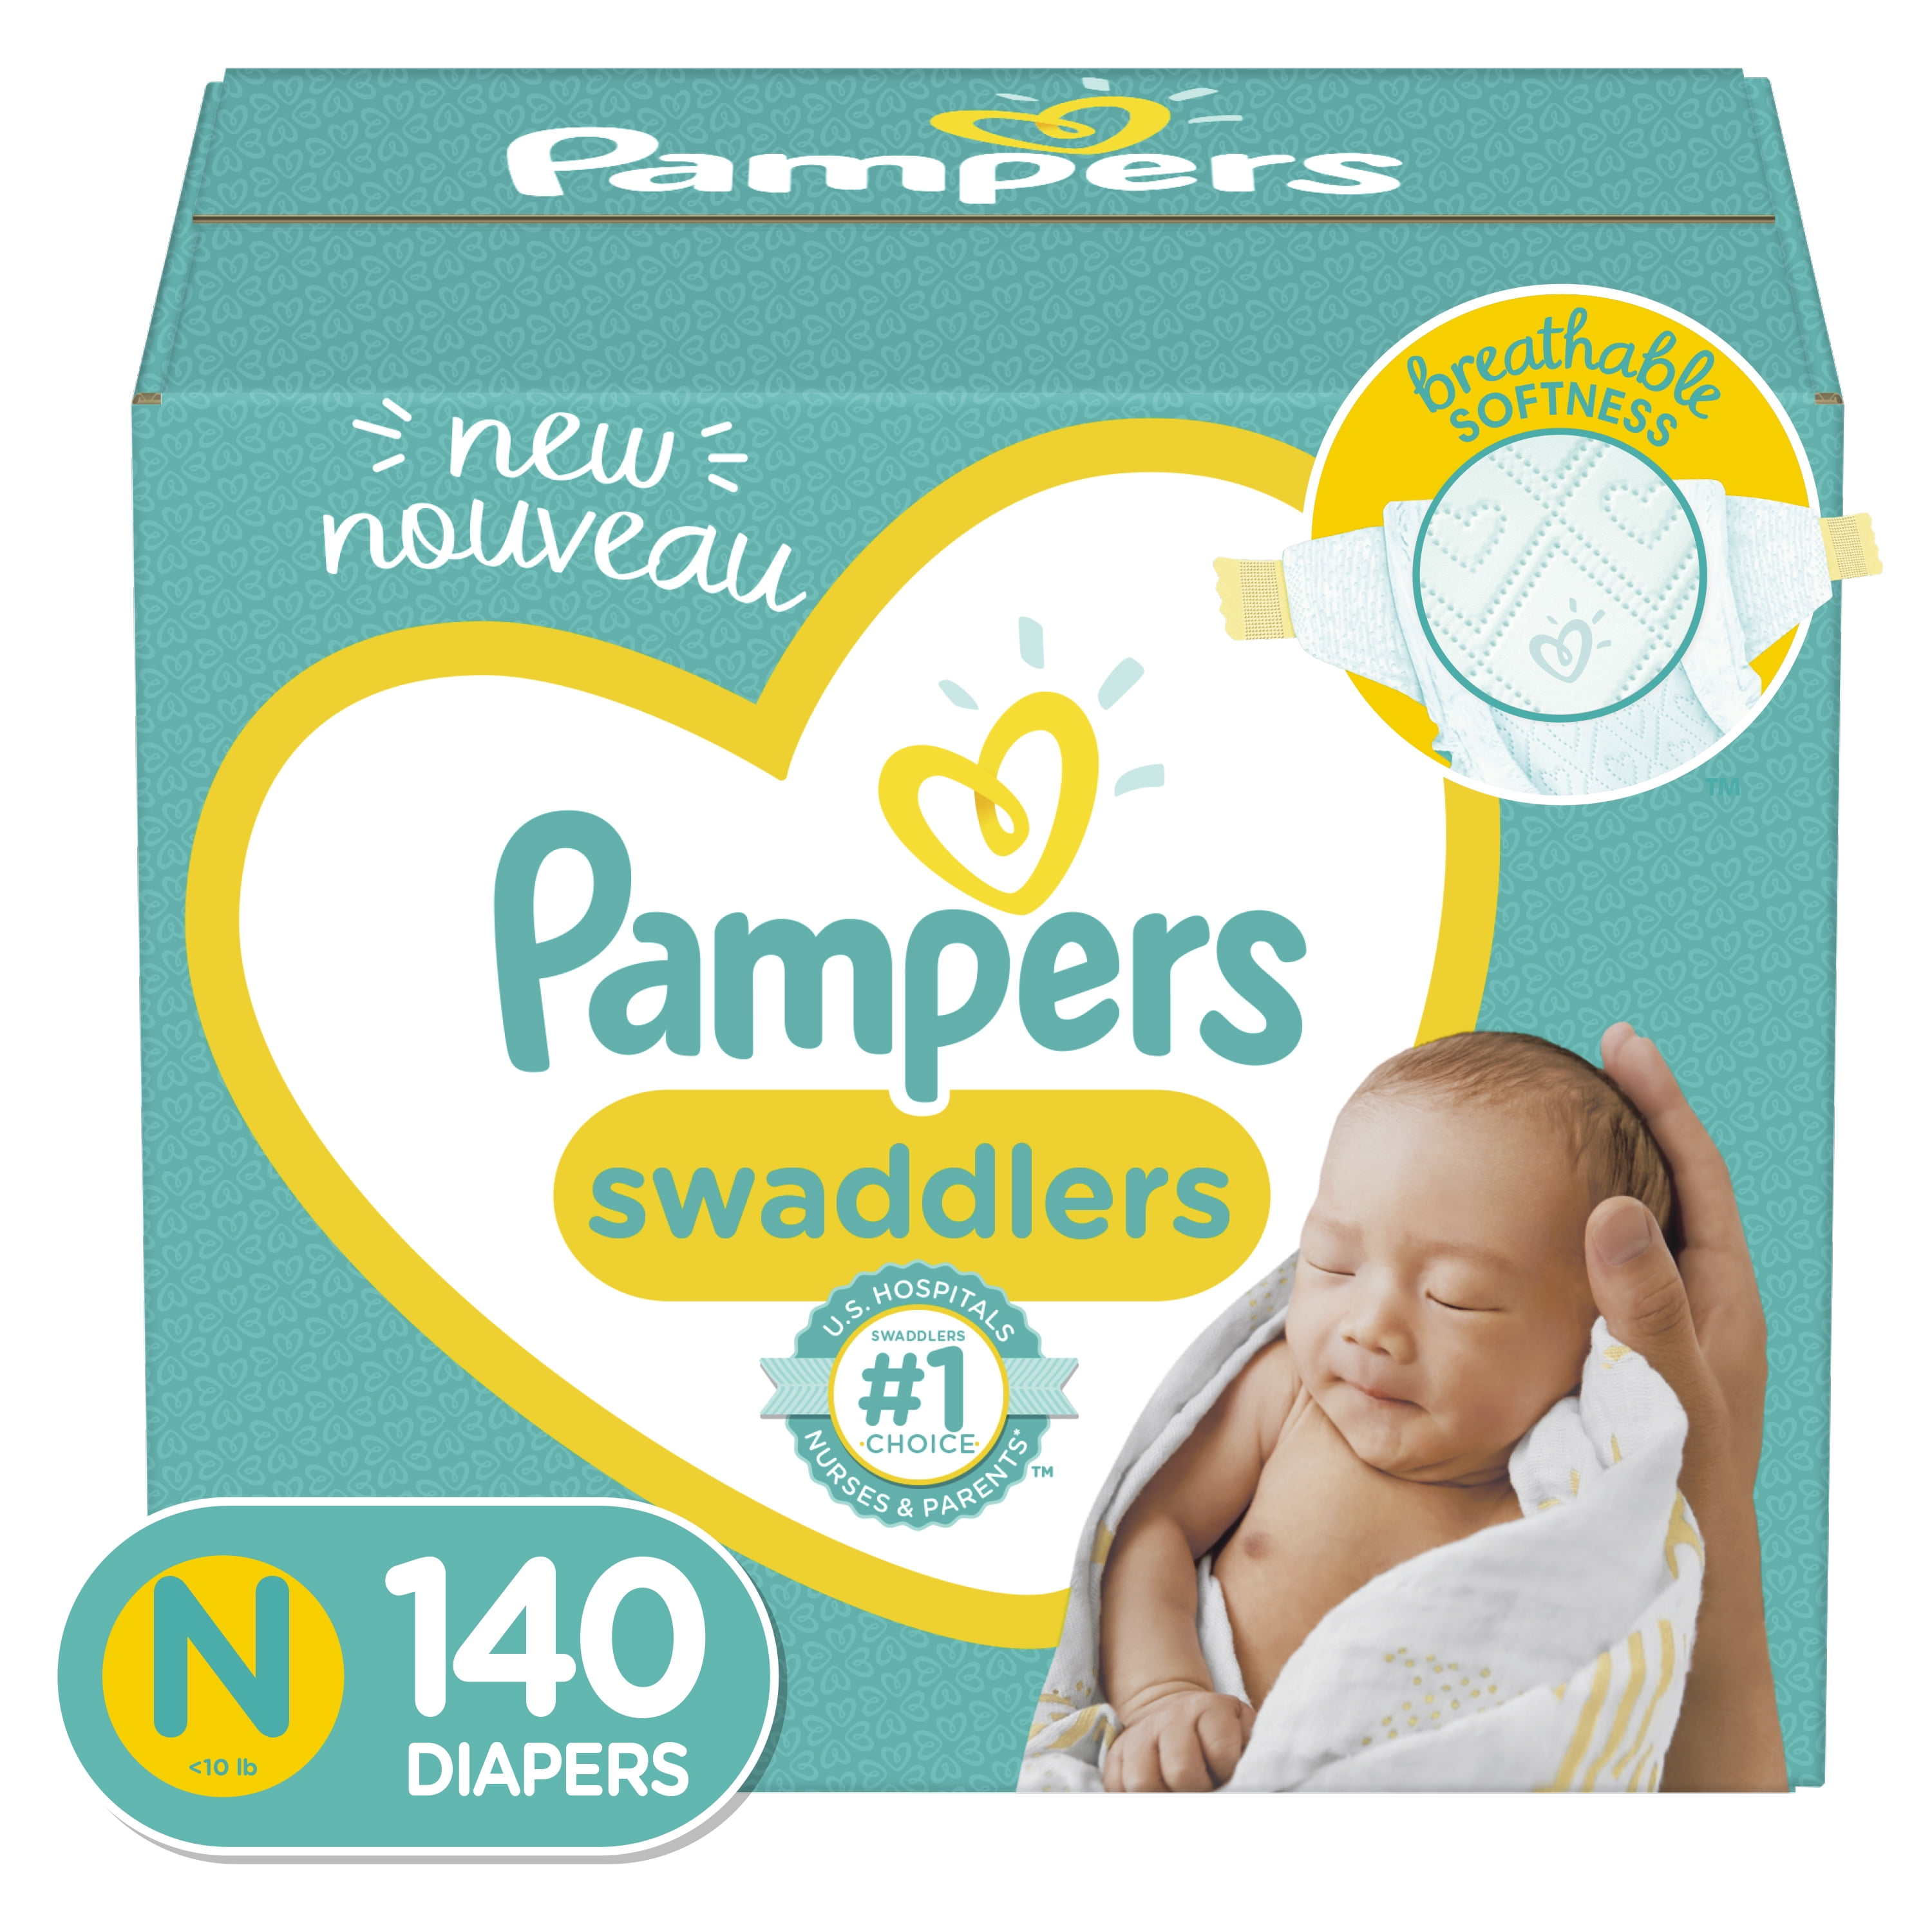 Pampers Swaddlers Soft and Absorbent 